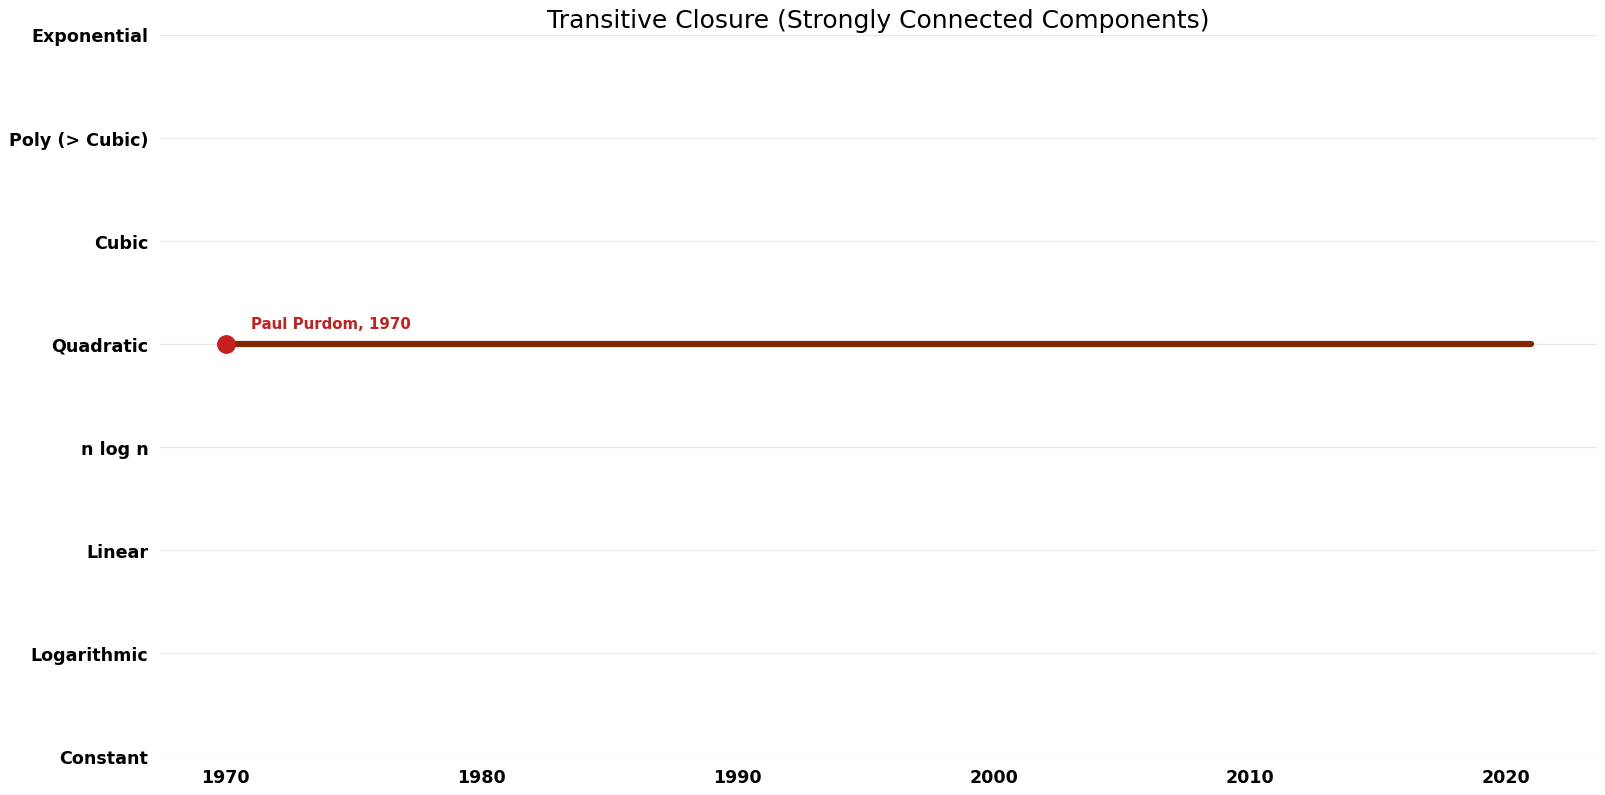 Strongly Connected Components - Transitive Closure - Space.png